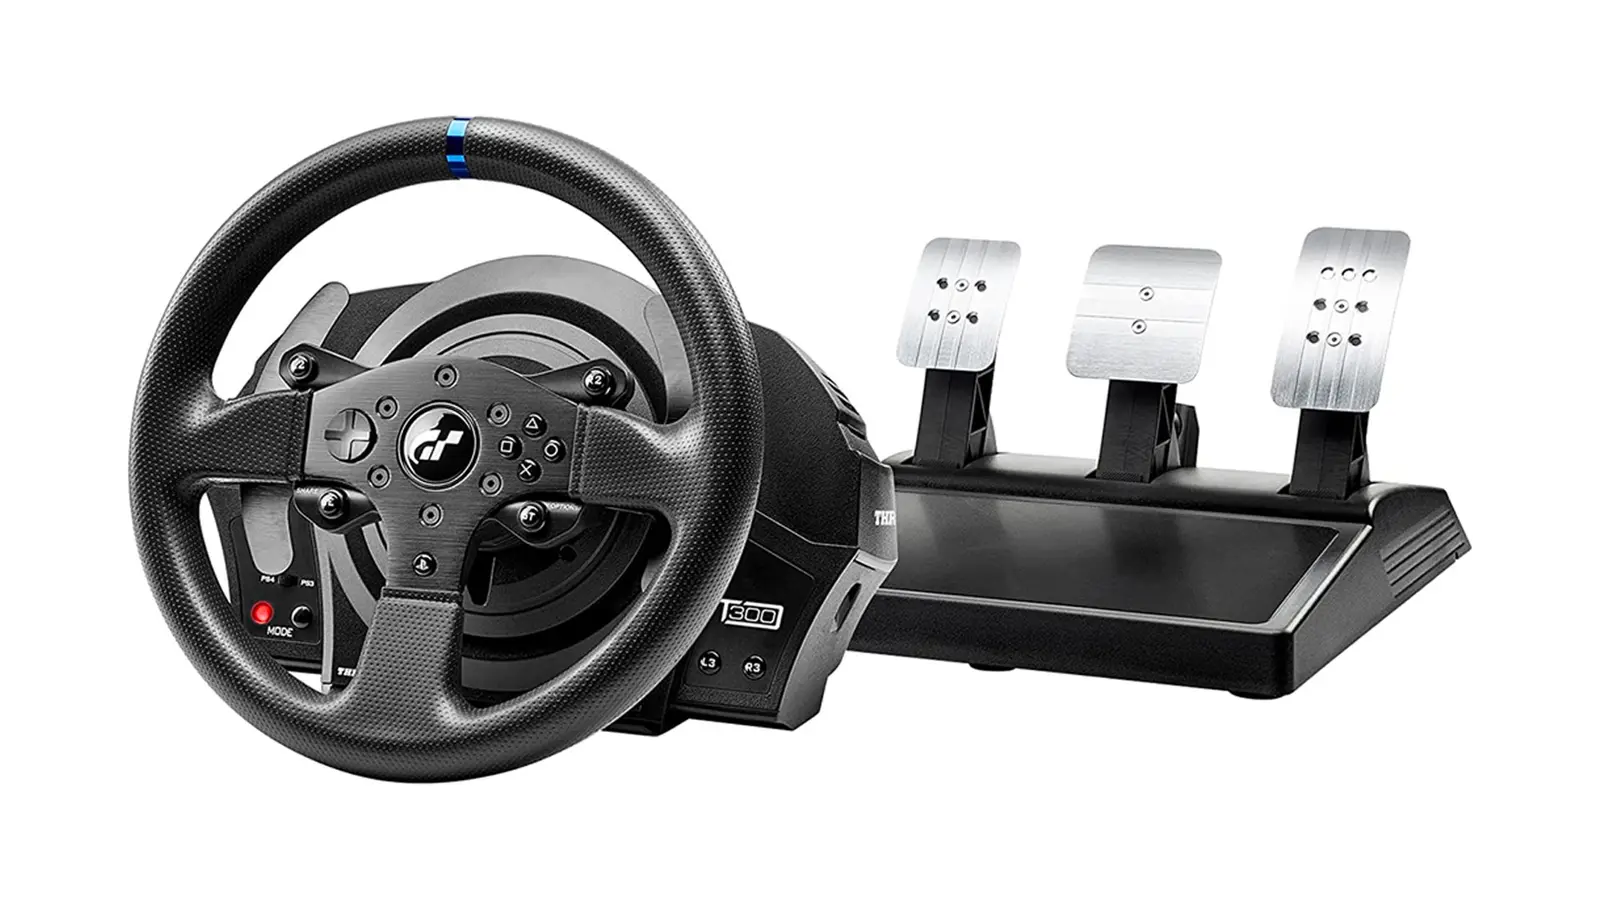 Thrustmaster T300 RS GT product image of a black racing wheel next to a set of metal pedals with a black base.